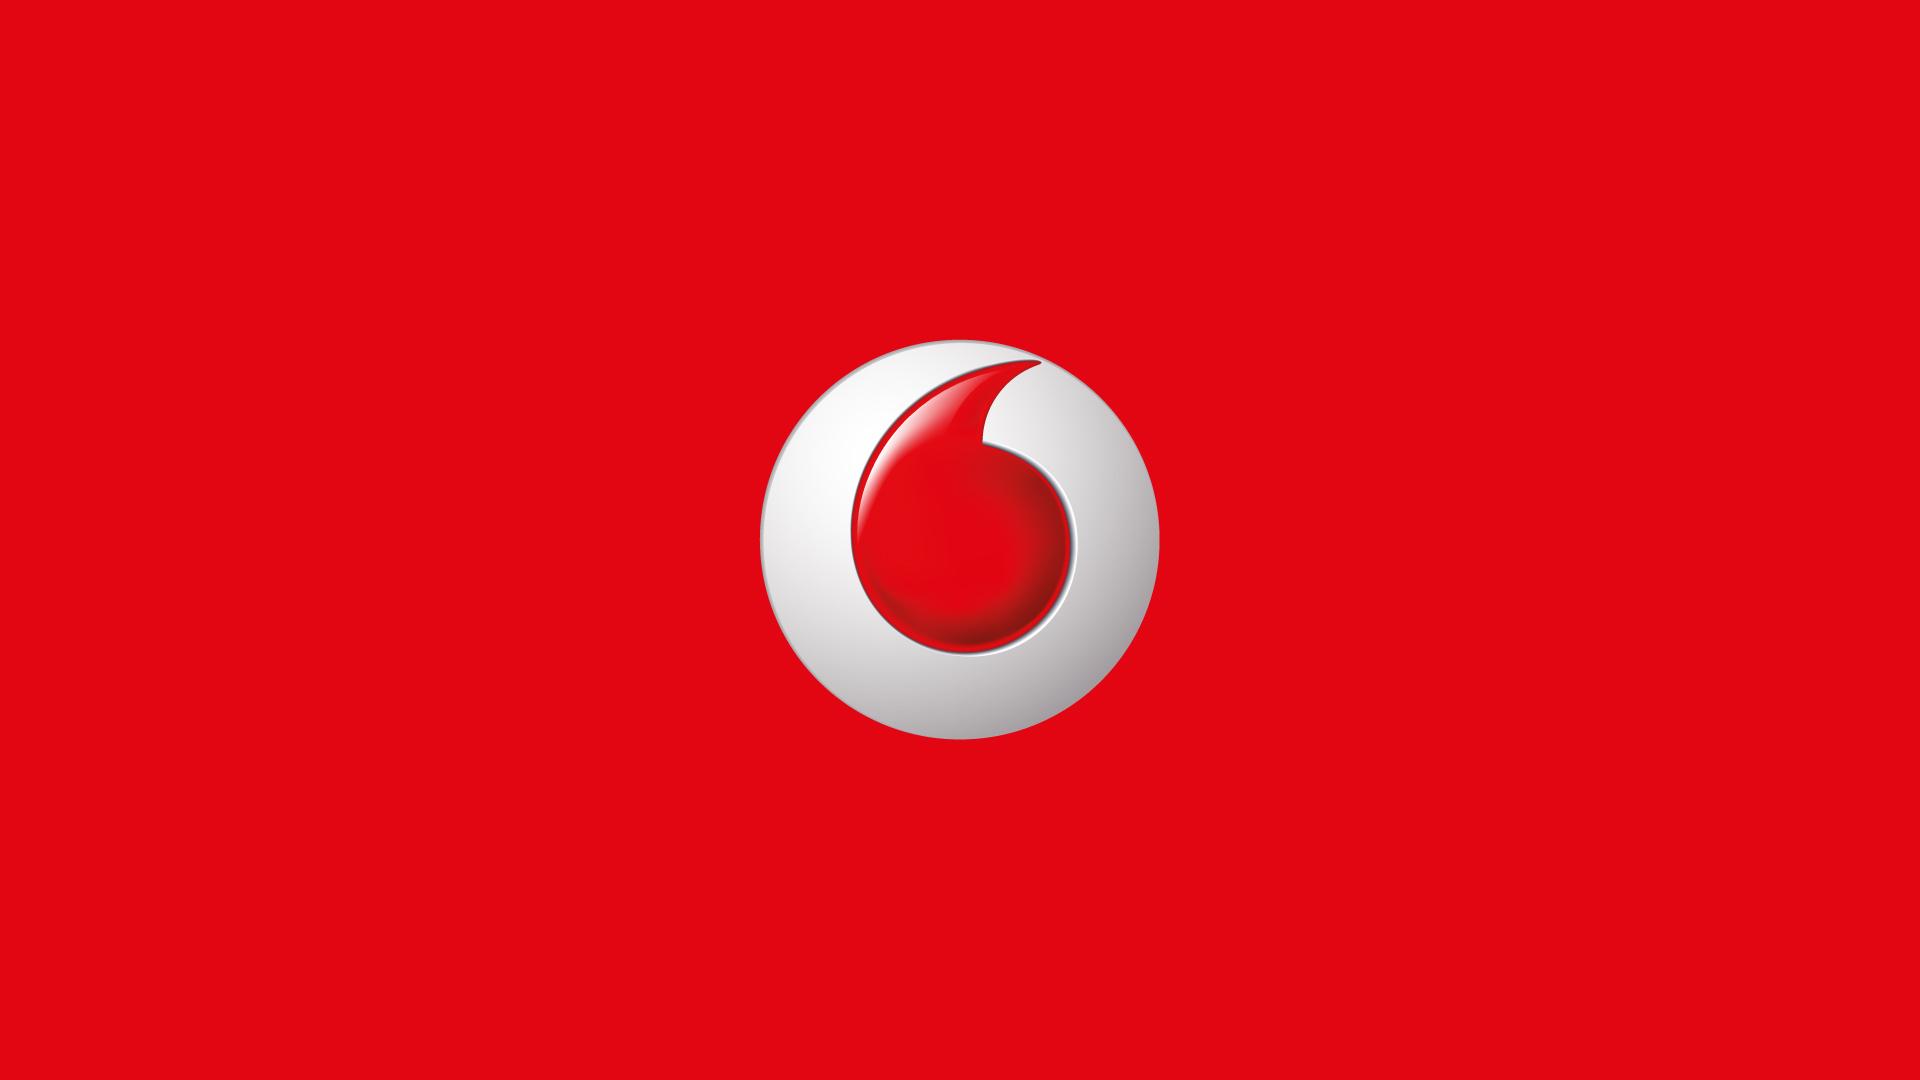 Vodafone Wallpapers - Top Free Vodafone Backgrounds - WallpaperAccess